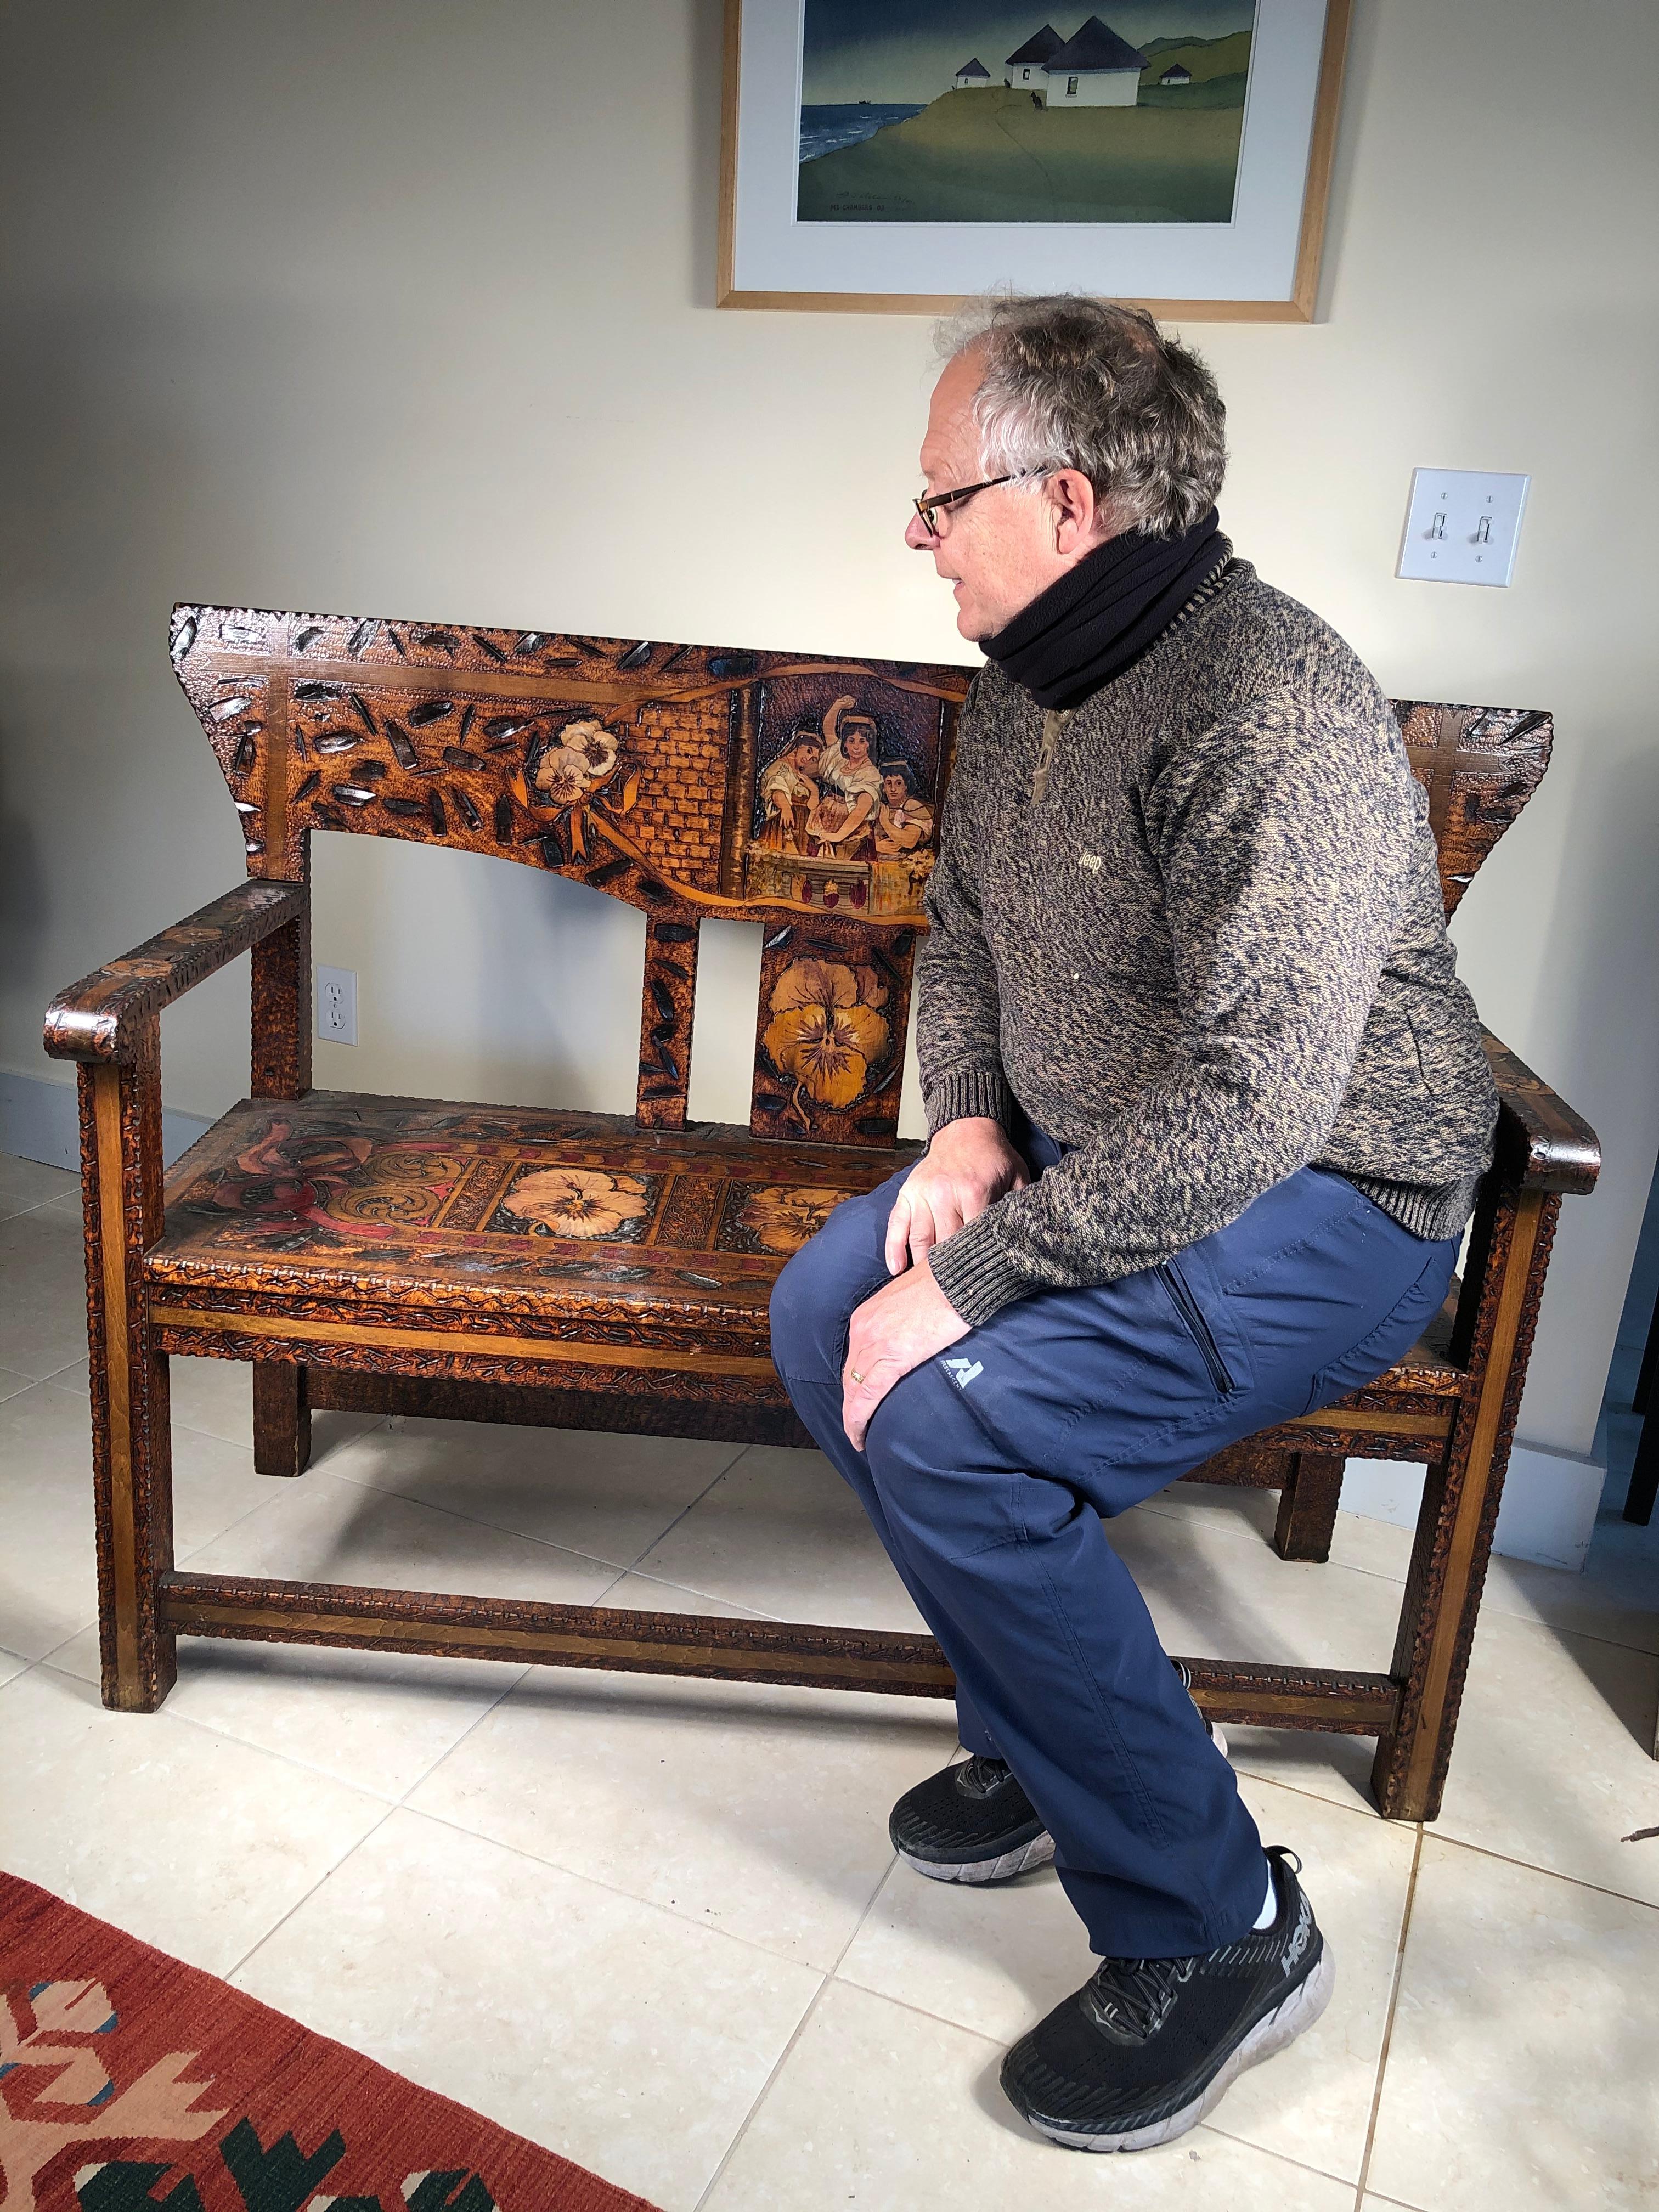 From an important thirty year old New England collection of hand decorated pyrography Arts & Crafts furnishings.

Unique work of art with a Rhode Island origin.
A romantic composition of a family executed in a hand carved and hand painted